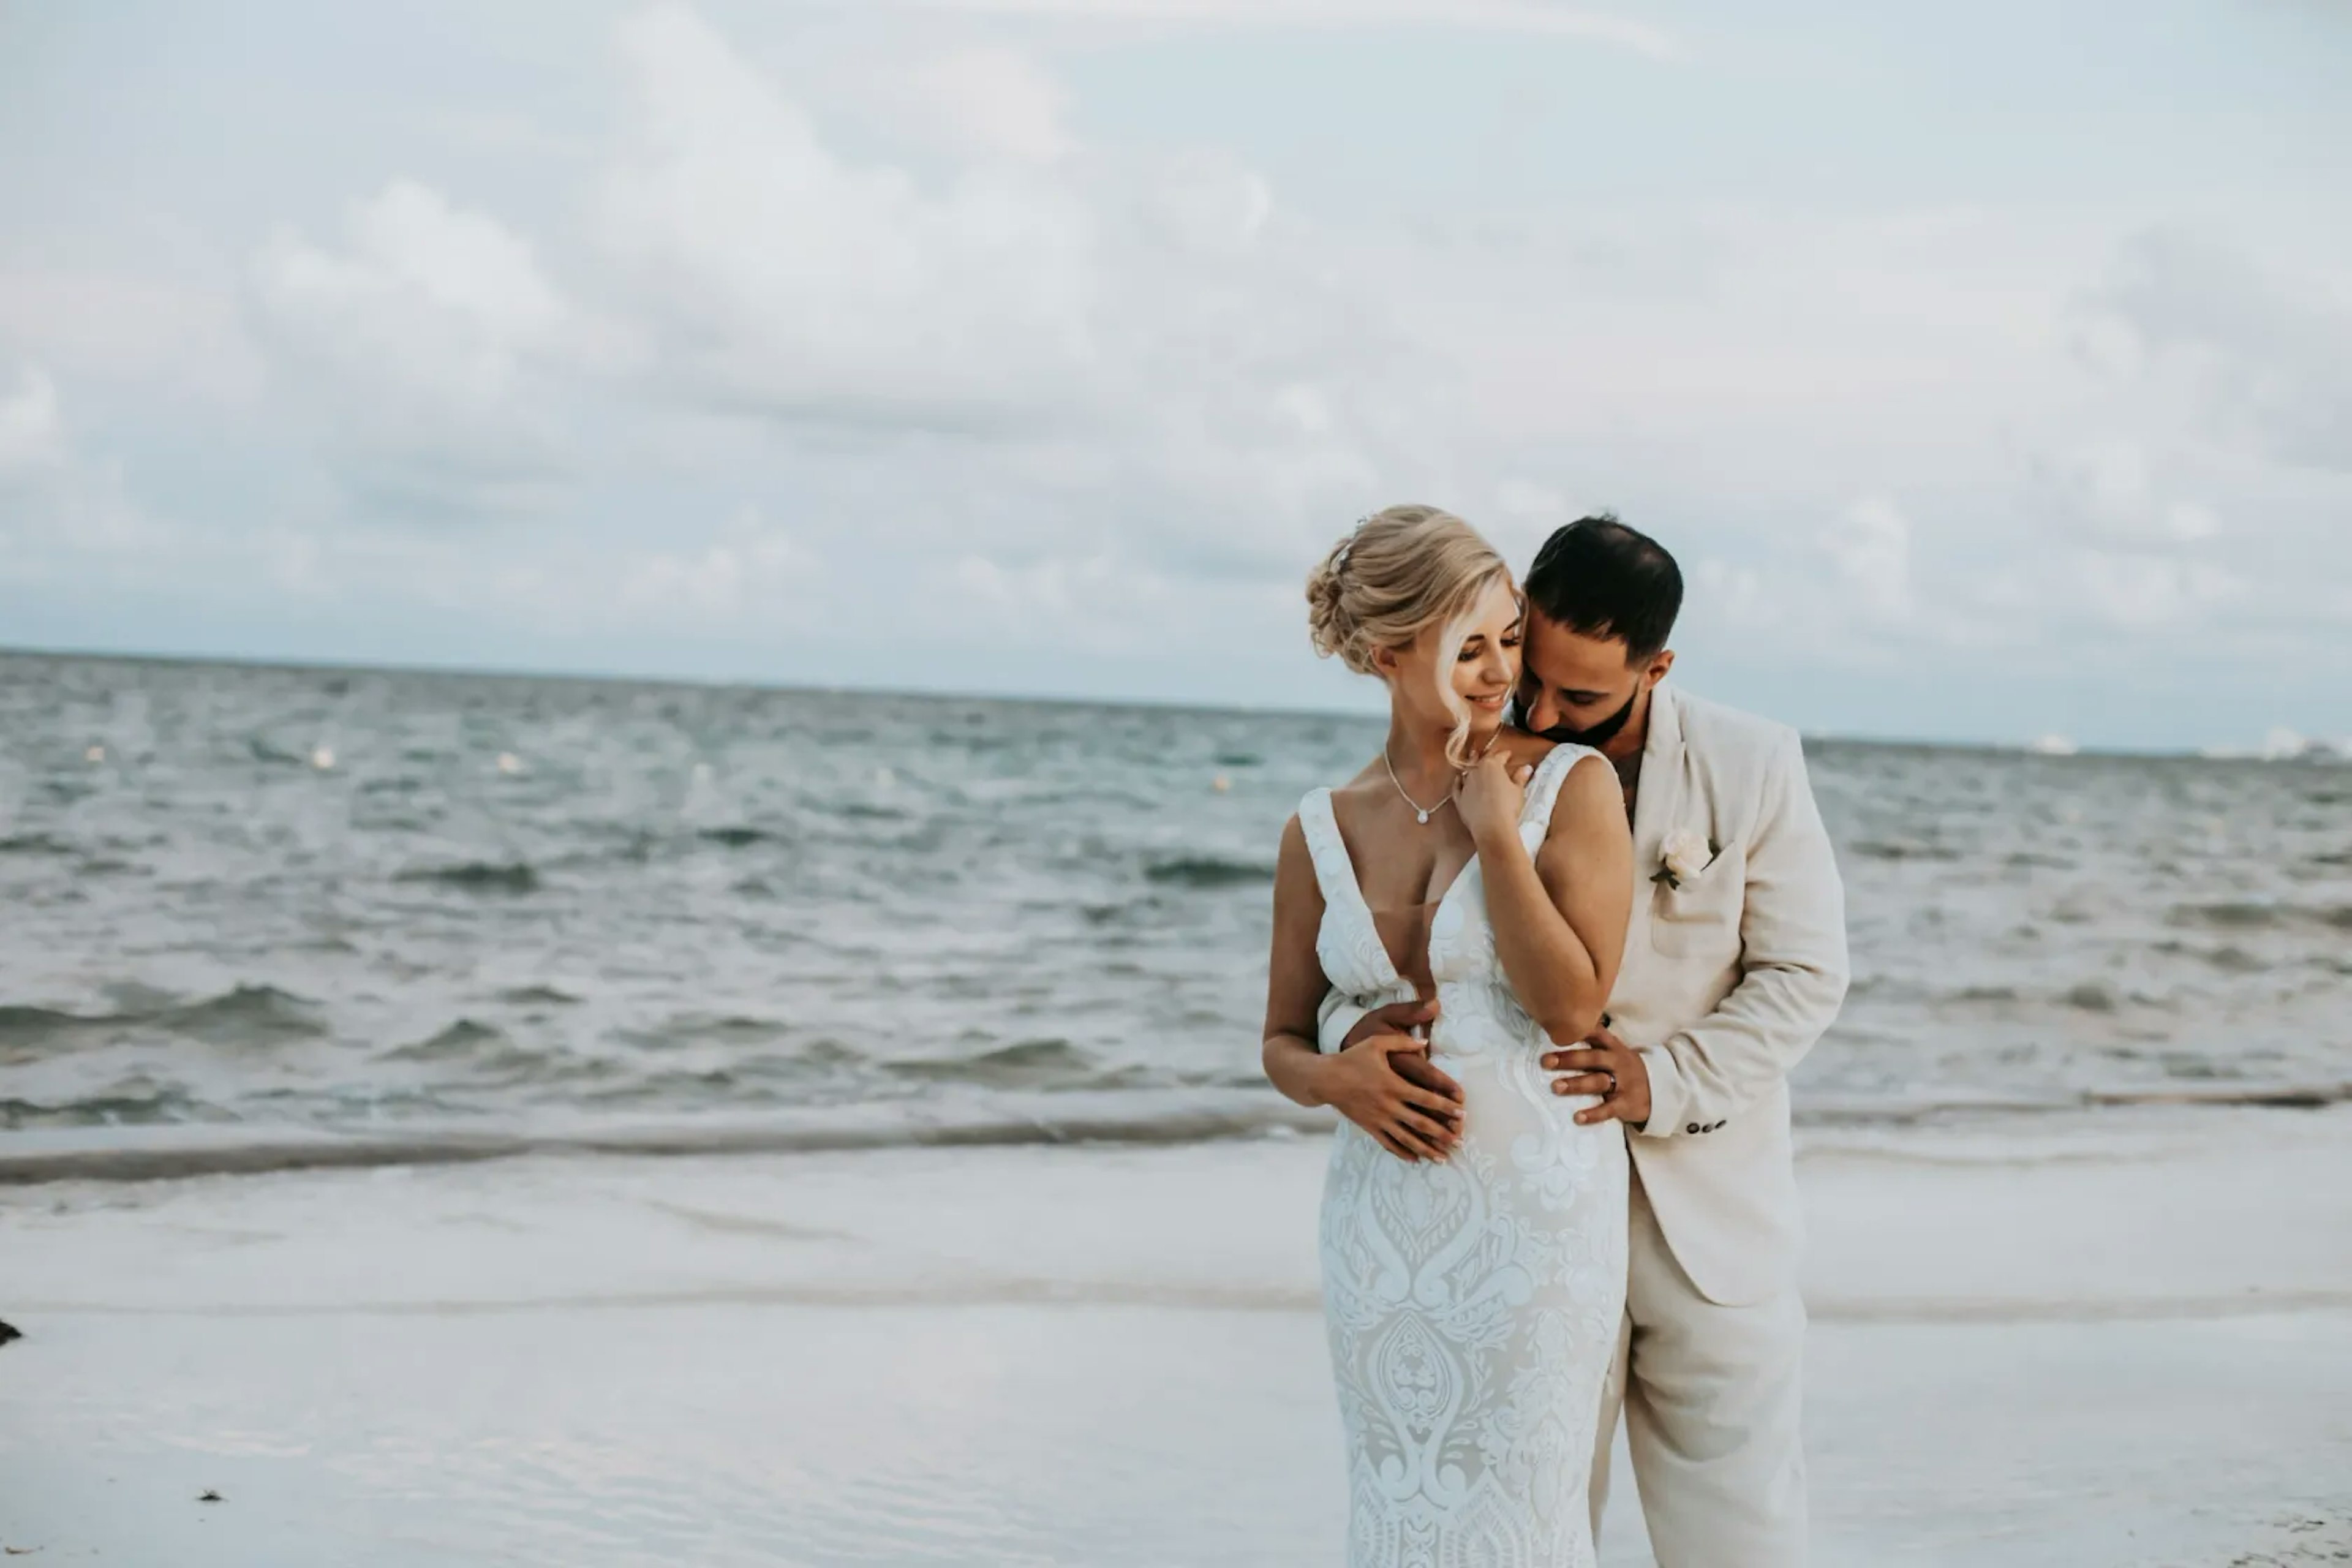 A tender moment on the beach captured between a groom, whispering to his bride, who wears a detailed lace wedding dress, both sharing a serene and intimate embrace against the backdrop of the sea.